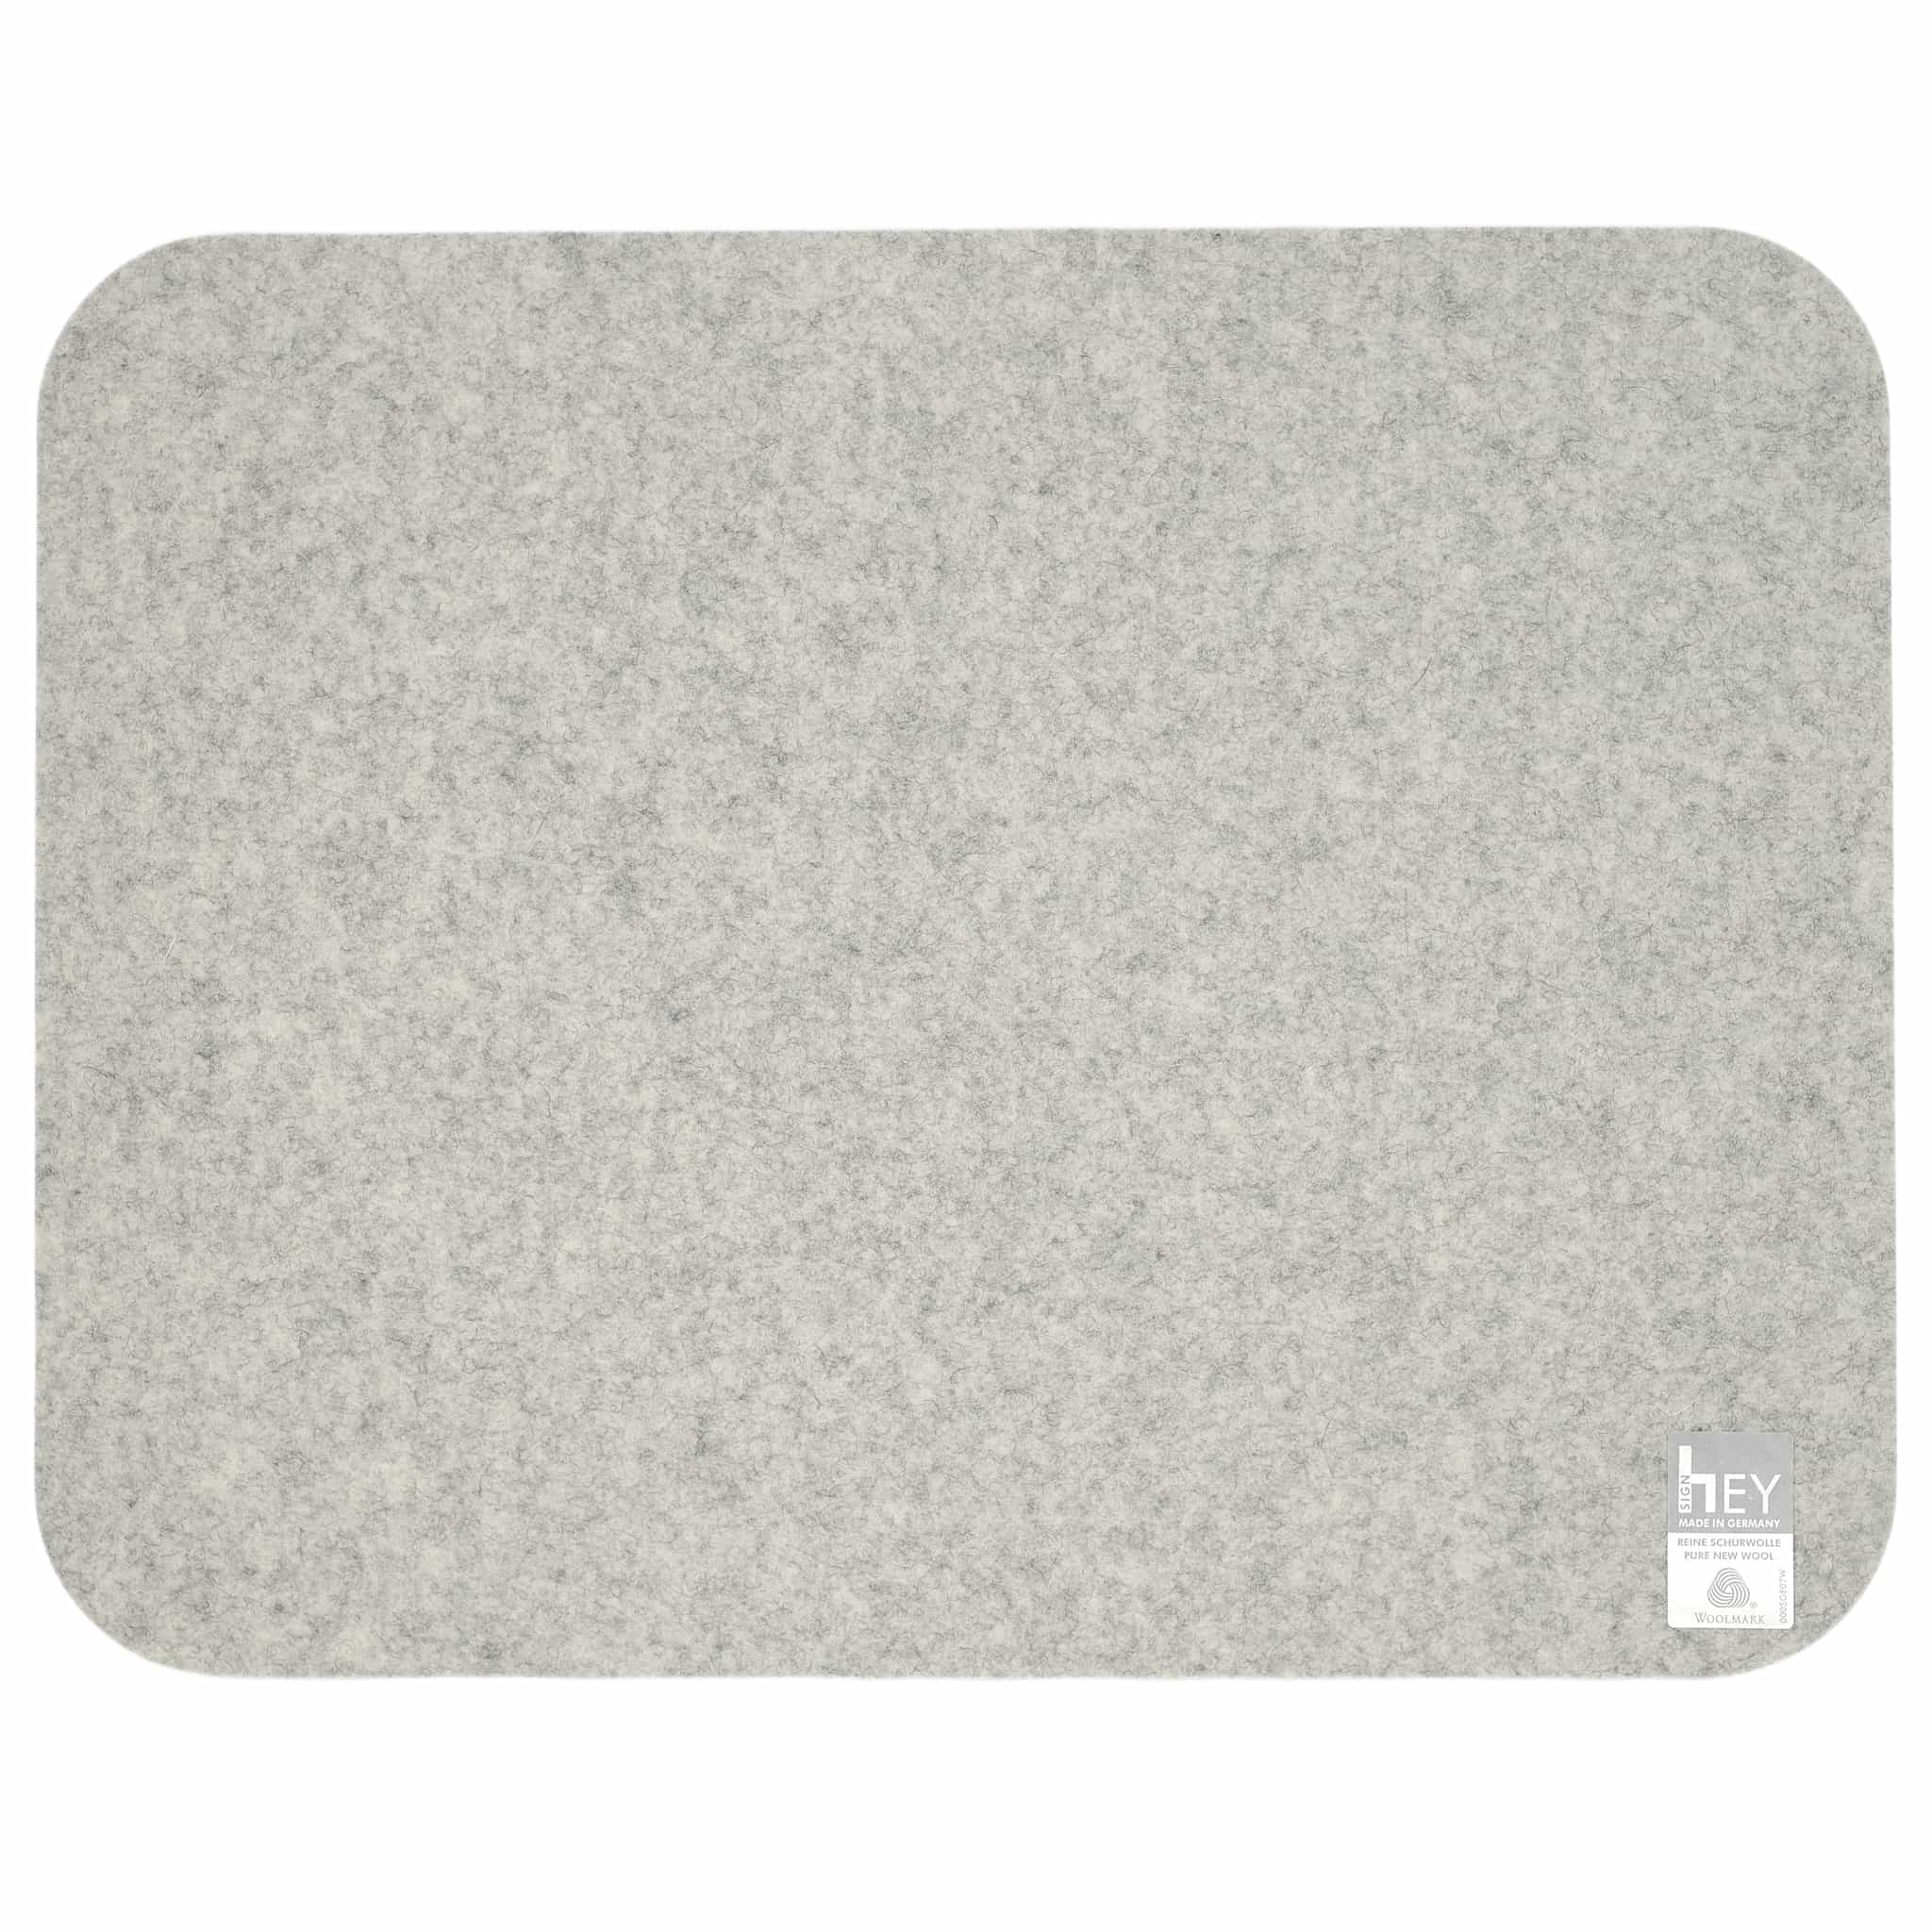 Rectangular Felt Placemat in Marble by Hey-Sign 300134506 looking at Back